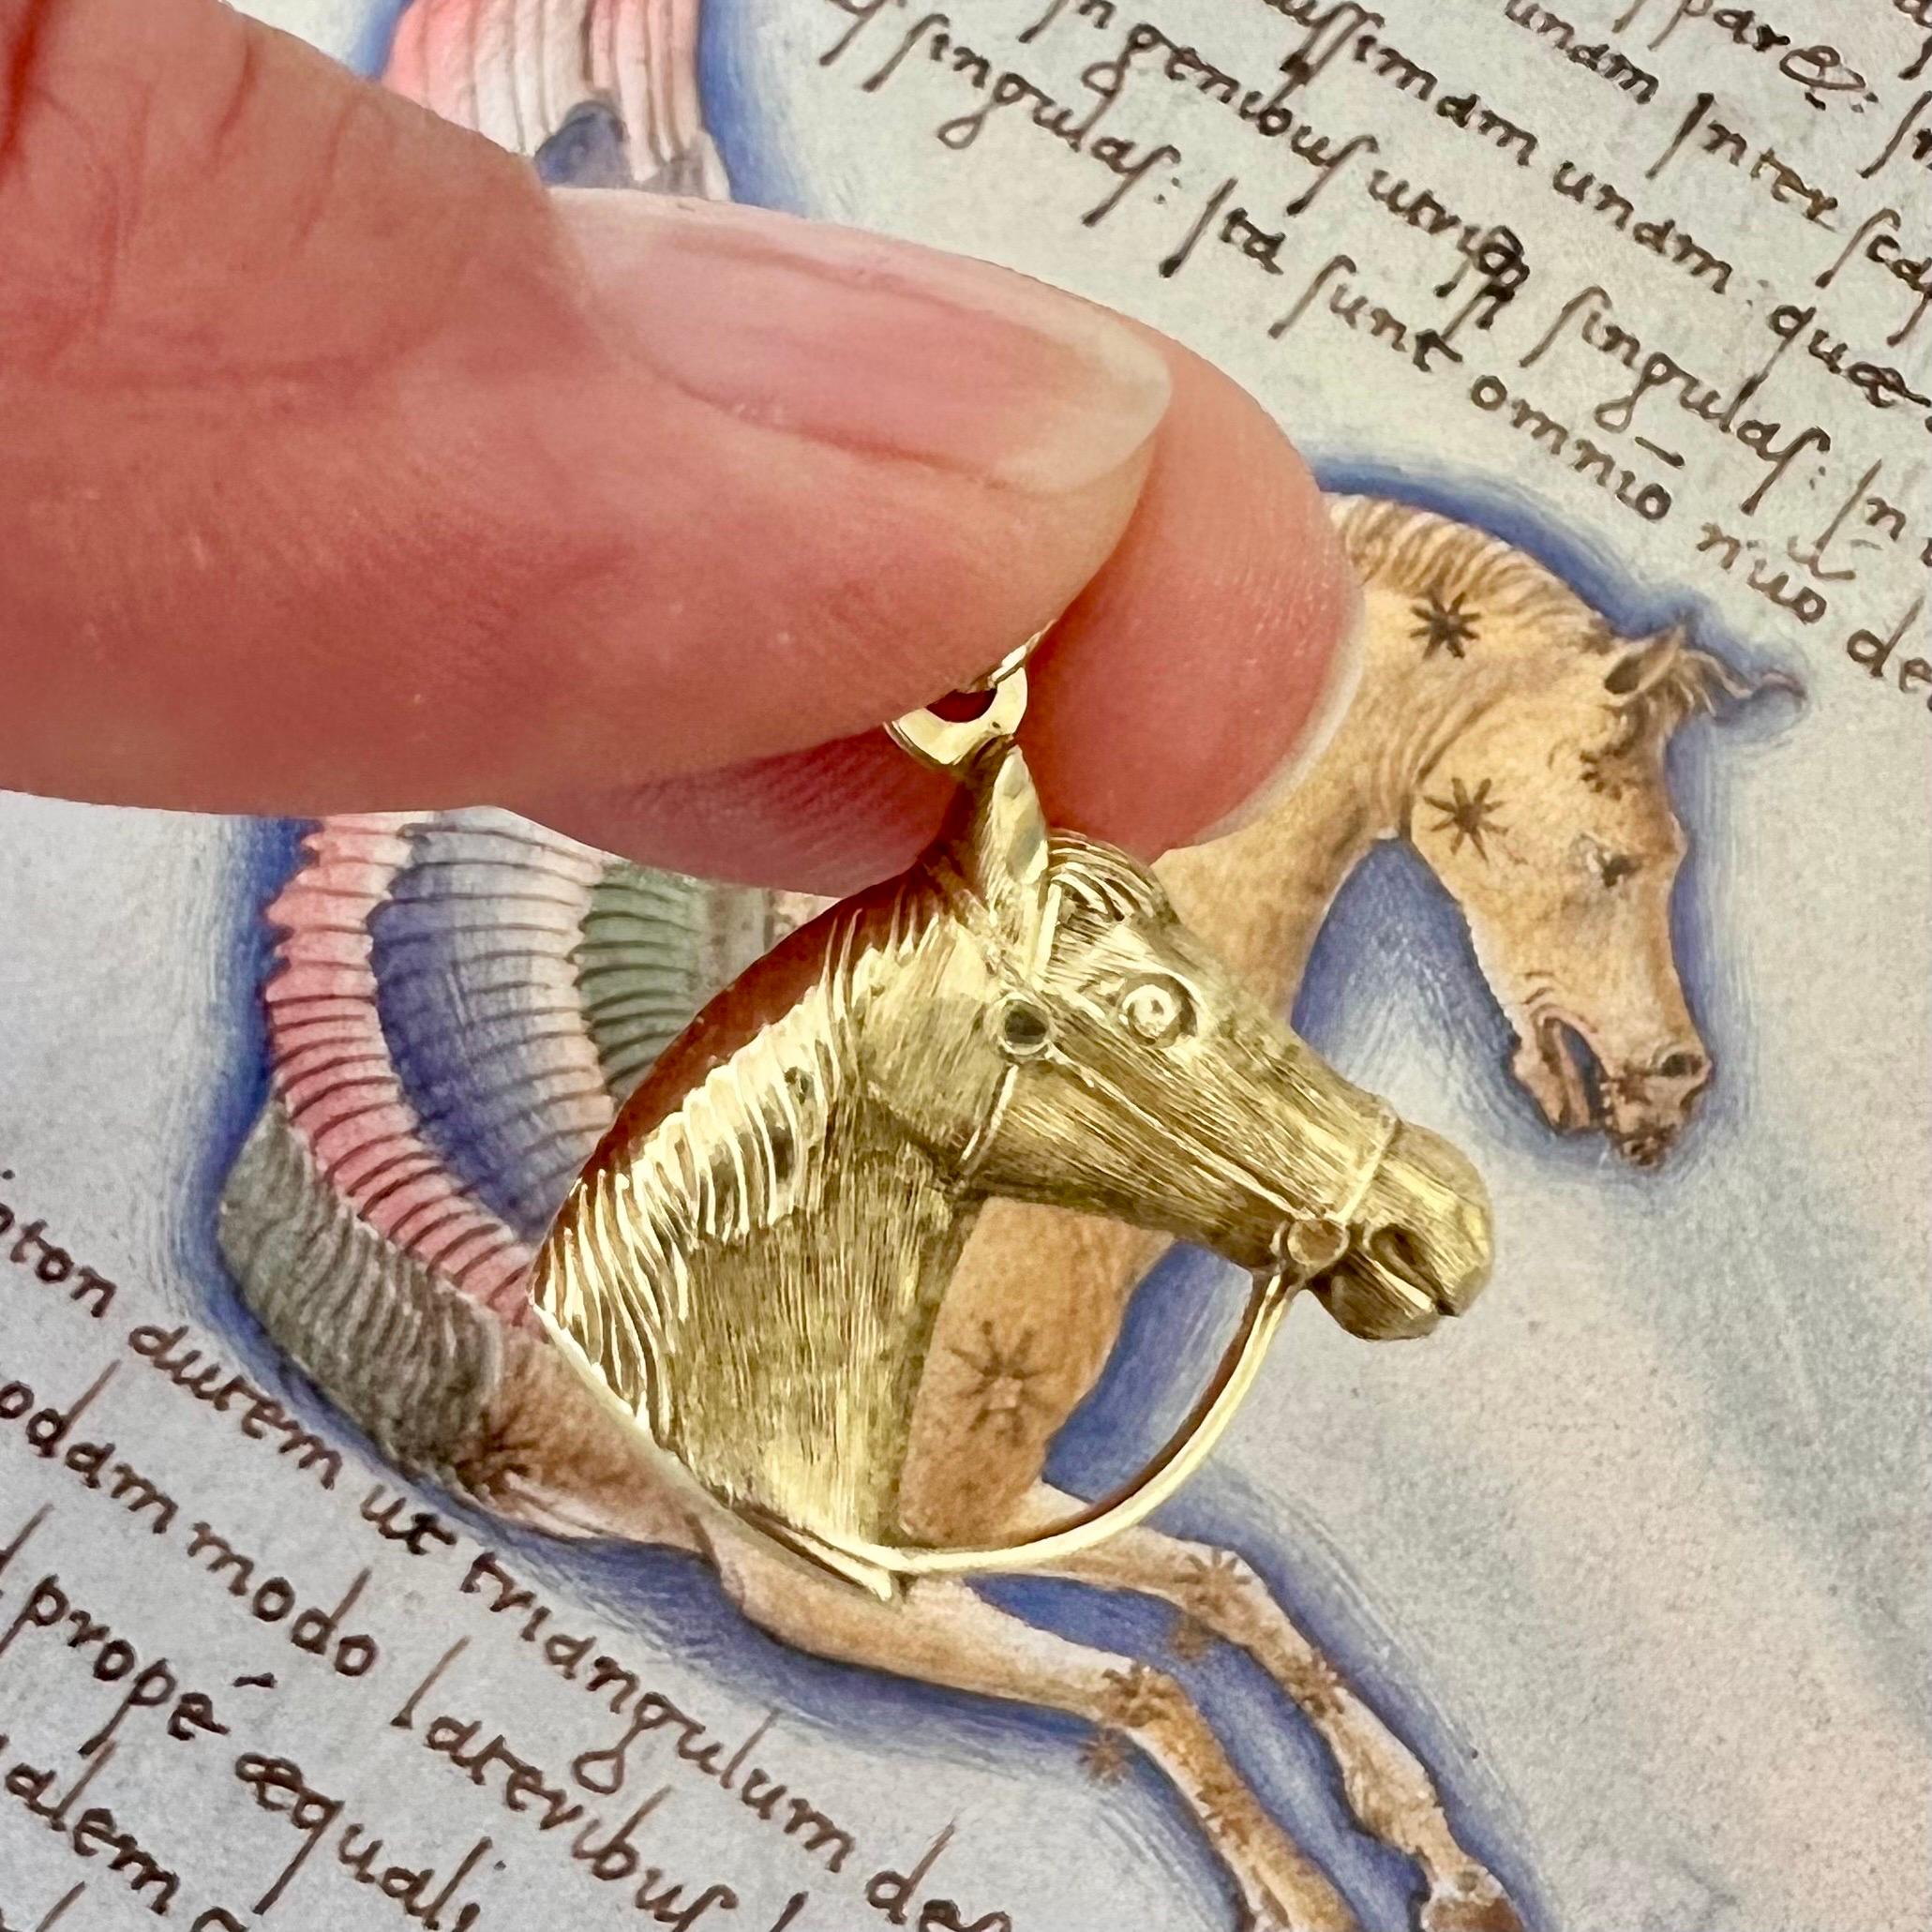 Horses represent a symbol of the Chinese zodiac, and those born during years of the horse are known for their free spirits. This beautiful vintage stylized horse head equestrian charm pendant is made in 14 karat gold. The horse is nicely detailed